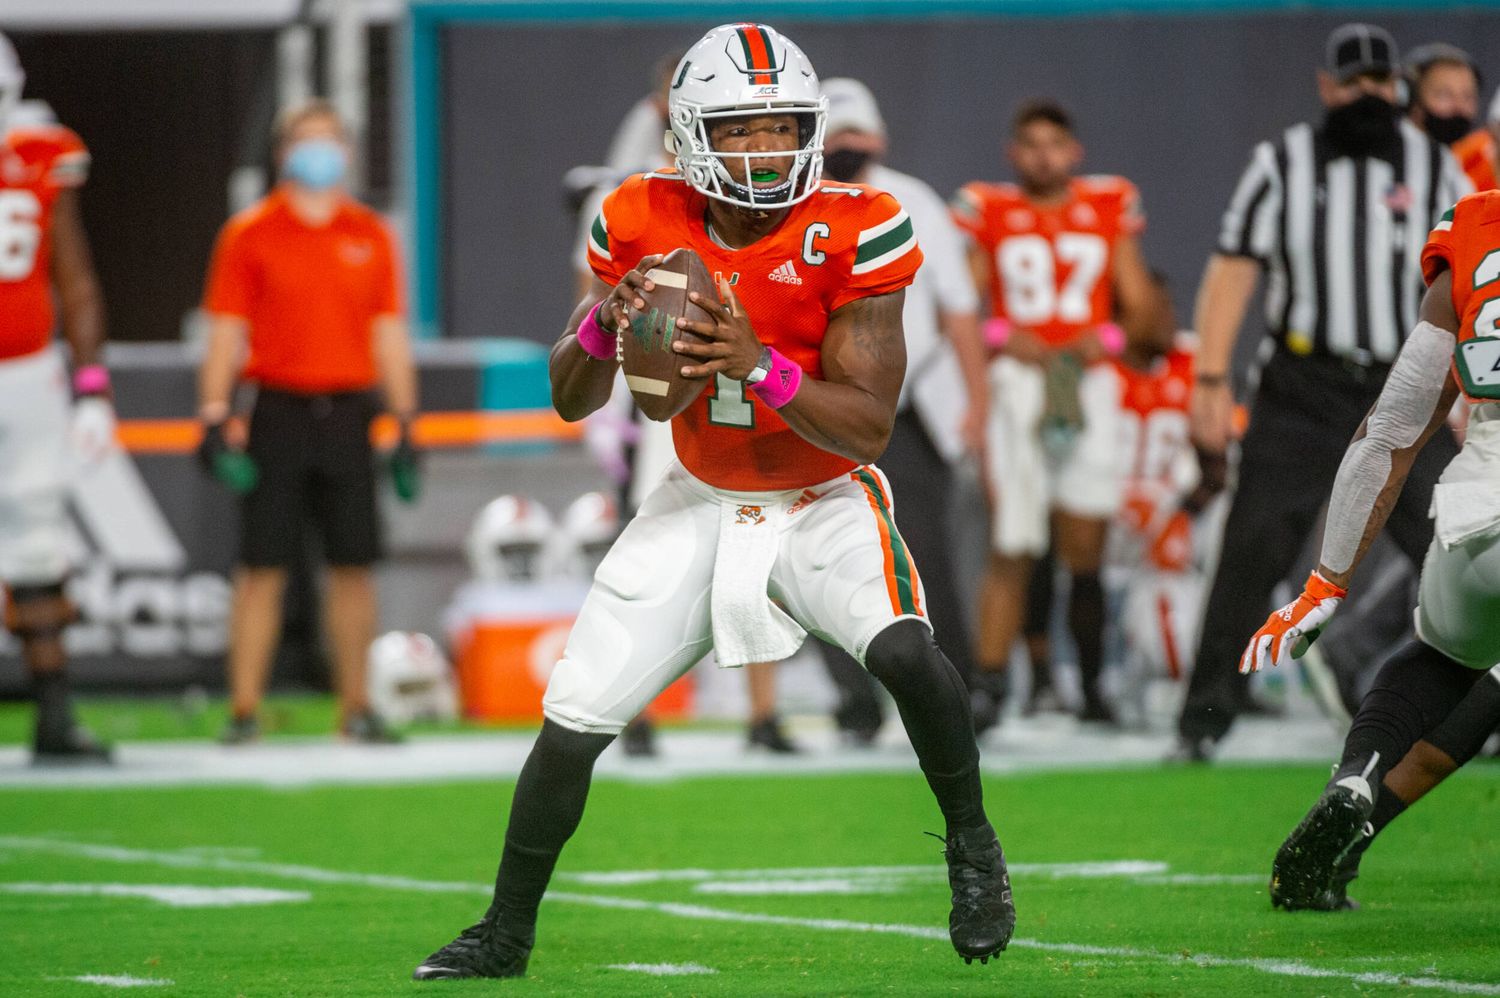 university-of-miami-football-schedule-2020-outlet-website-save-57